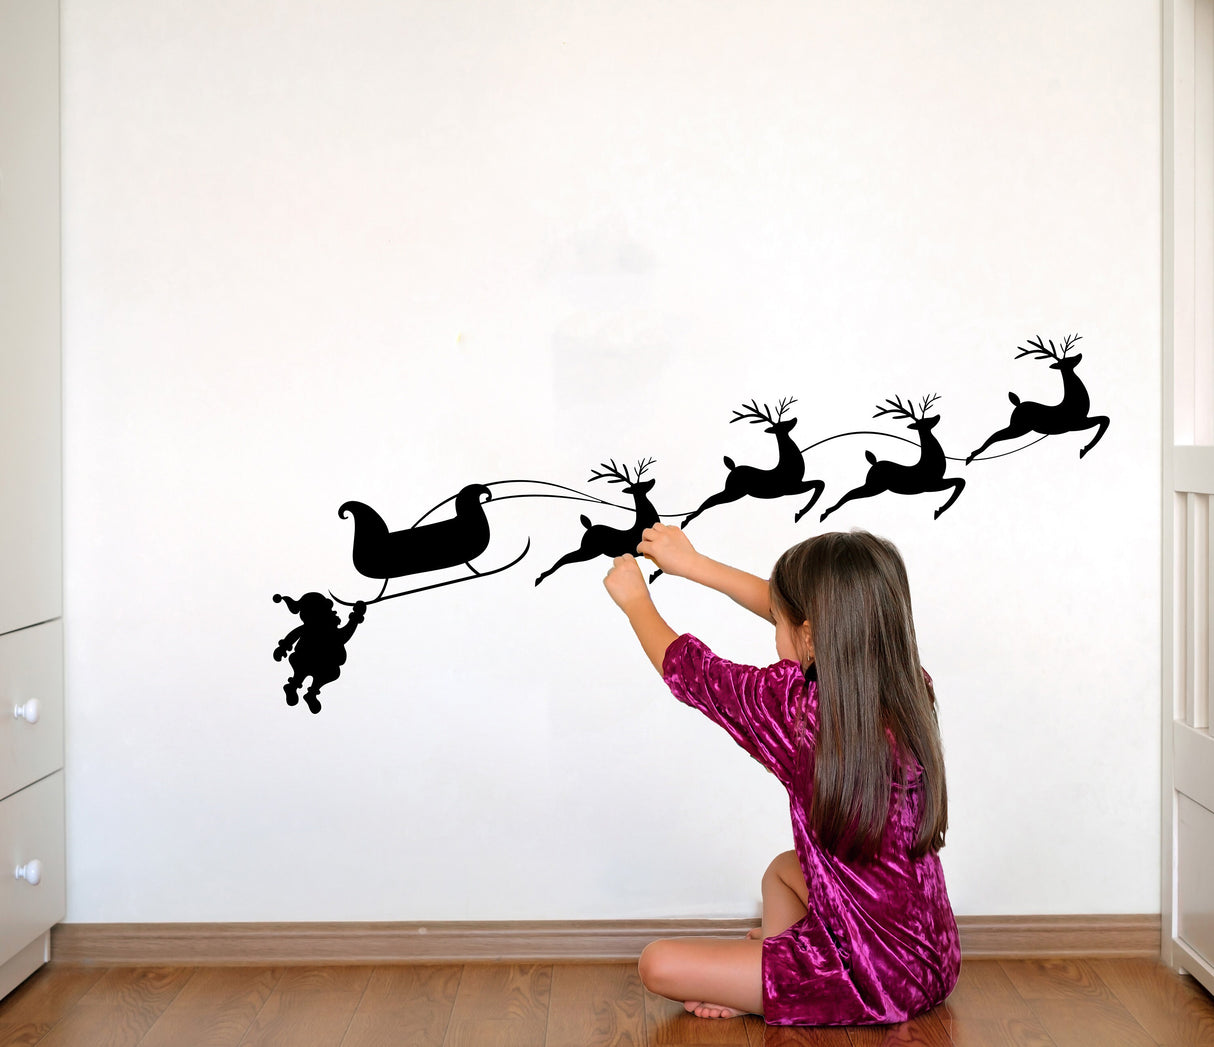 Humorous Santa & Sleigh with Deers Wall Decal - Christmas Silhouette Stickers - Holiday Home Room Decor - Festive Wall Art Mural